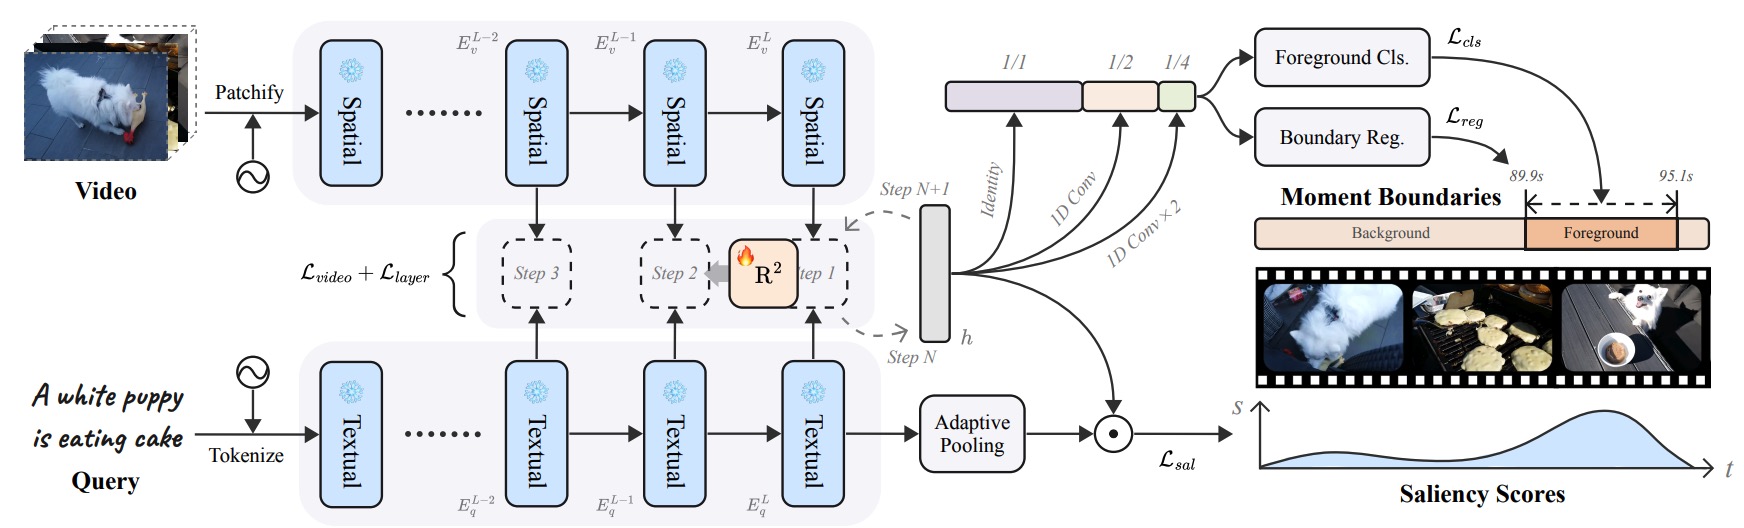 R2-Tuning: Efficient Image-to-Video Transfer Learning for Video Temporal Grounding